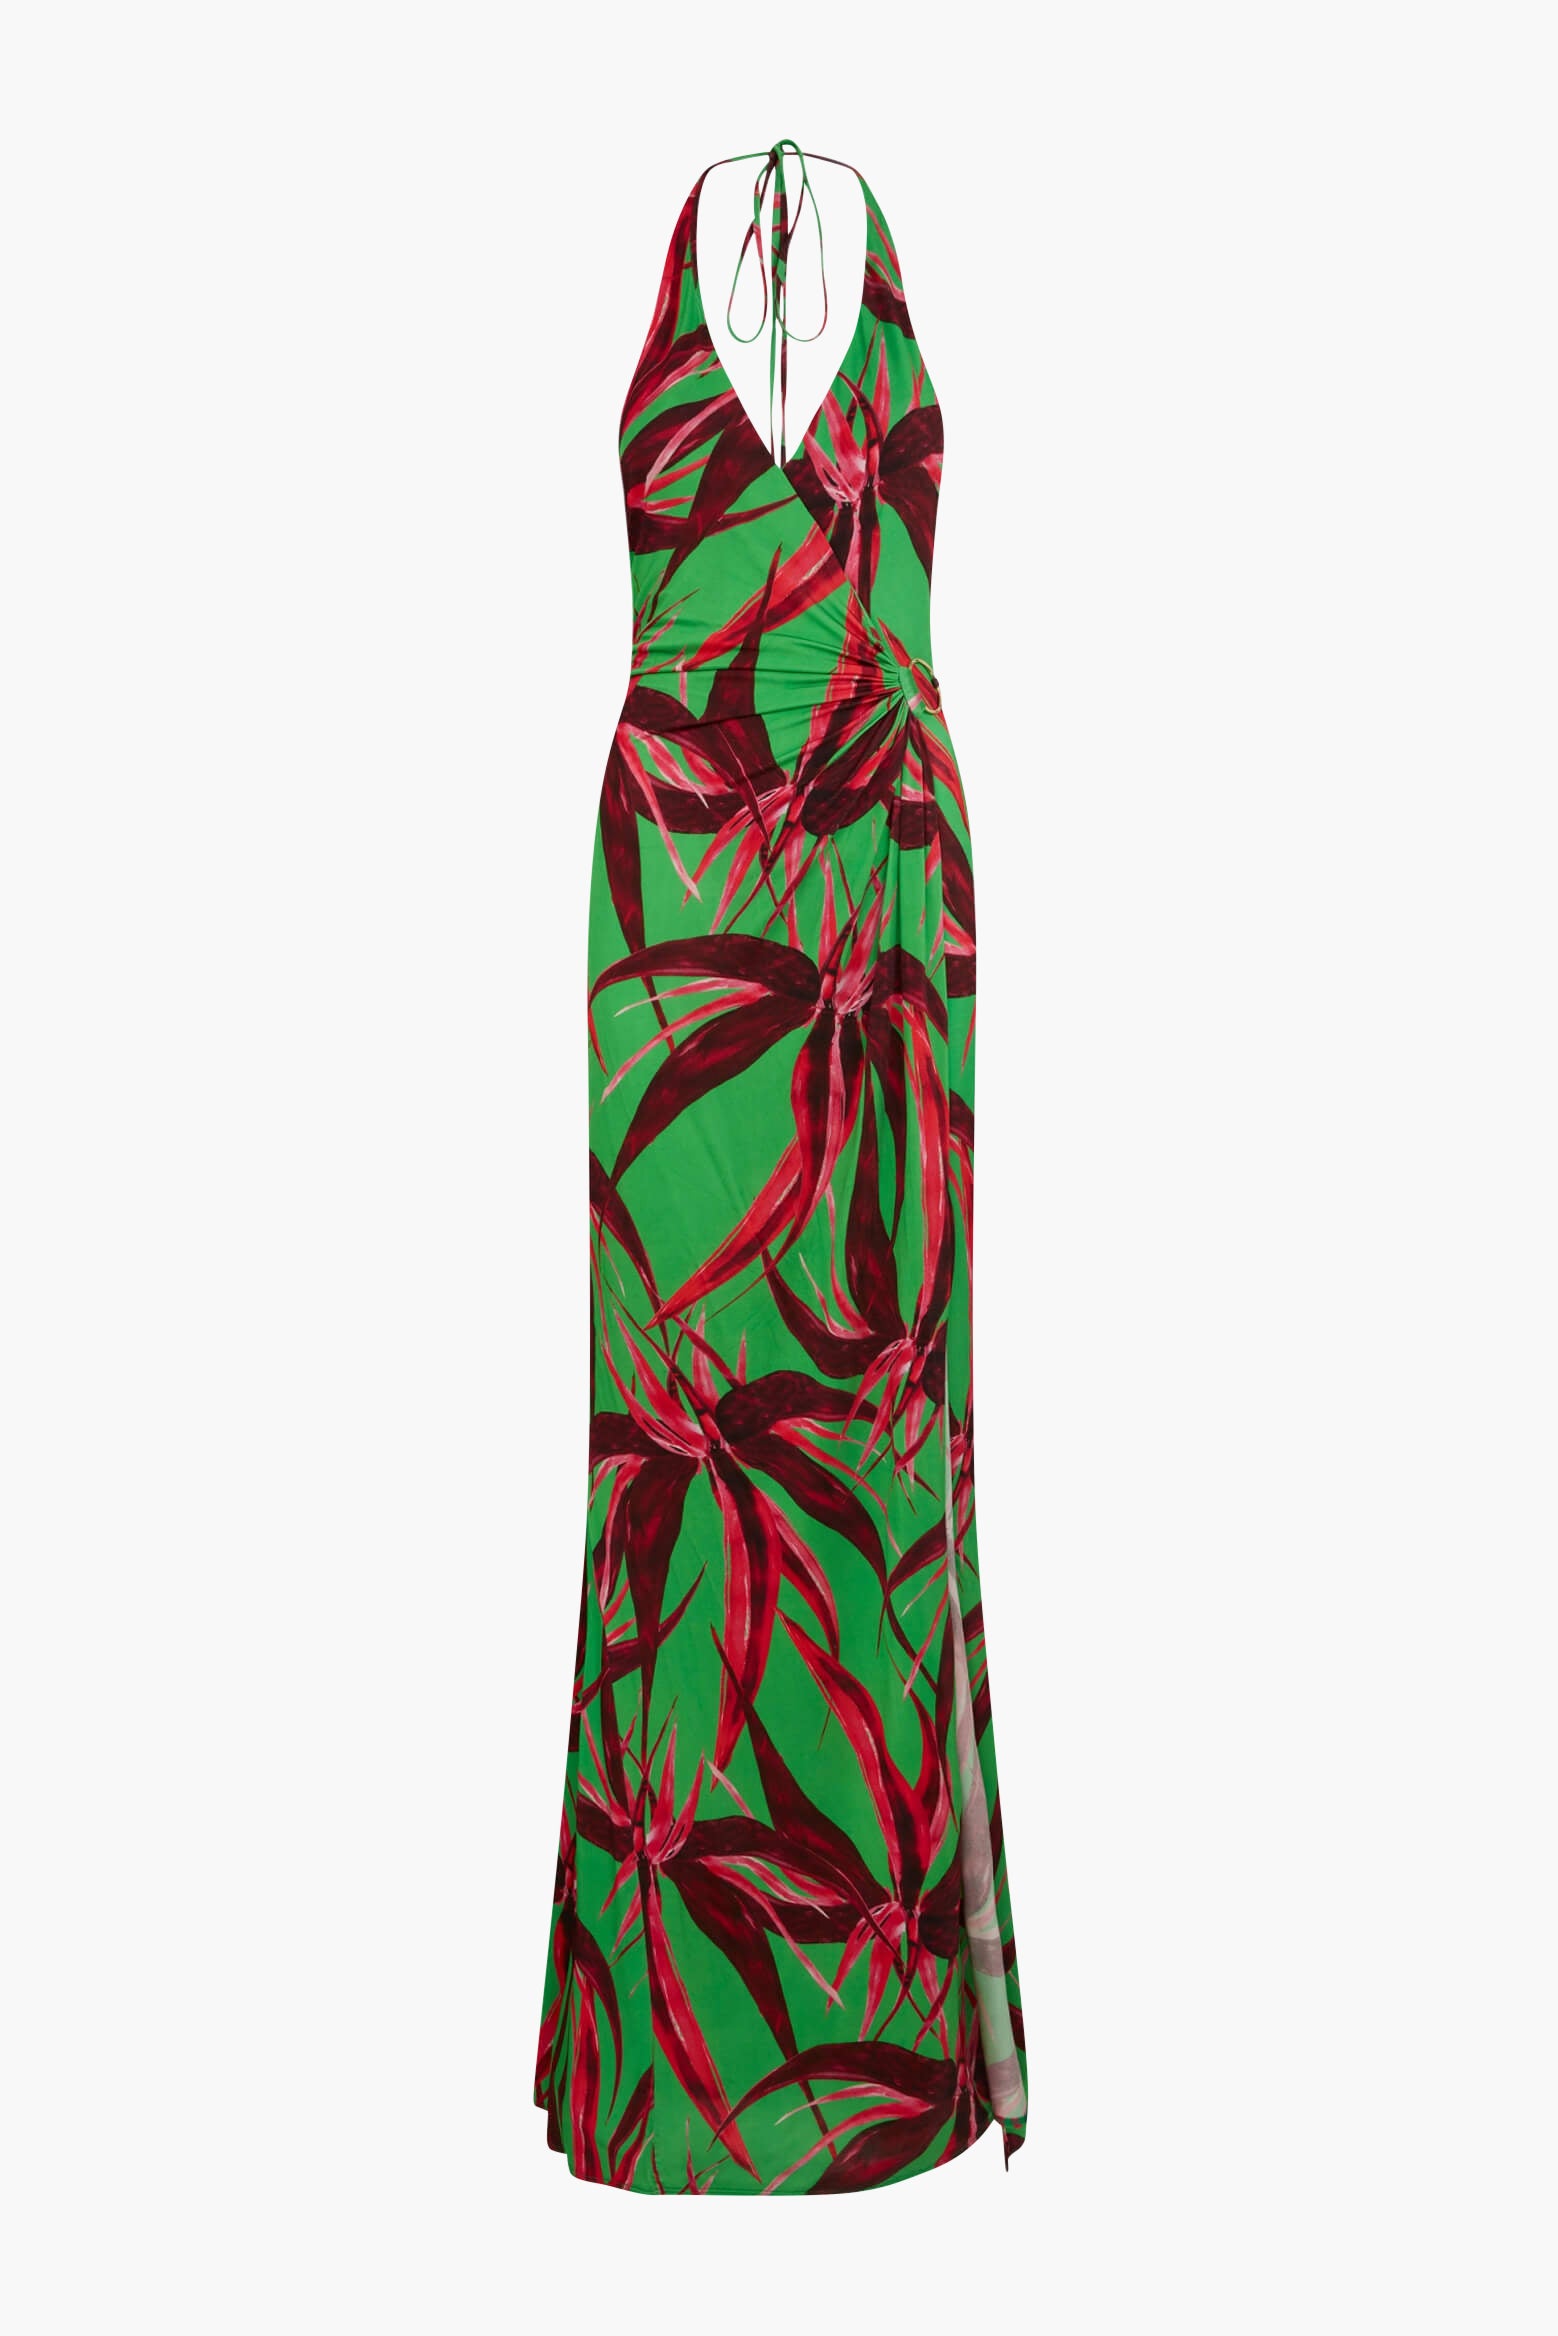 Louisa Ballou King Tide Dress in Red Green Flower available at TNT The New Trend Australia.